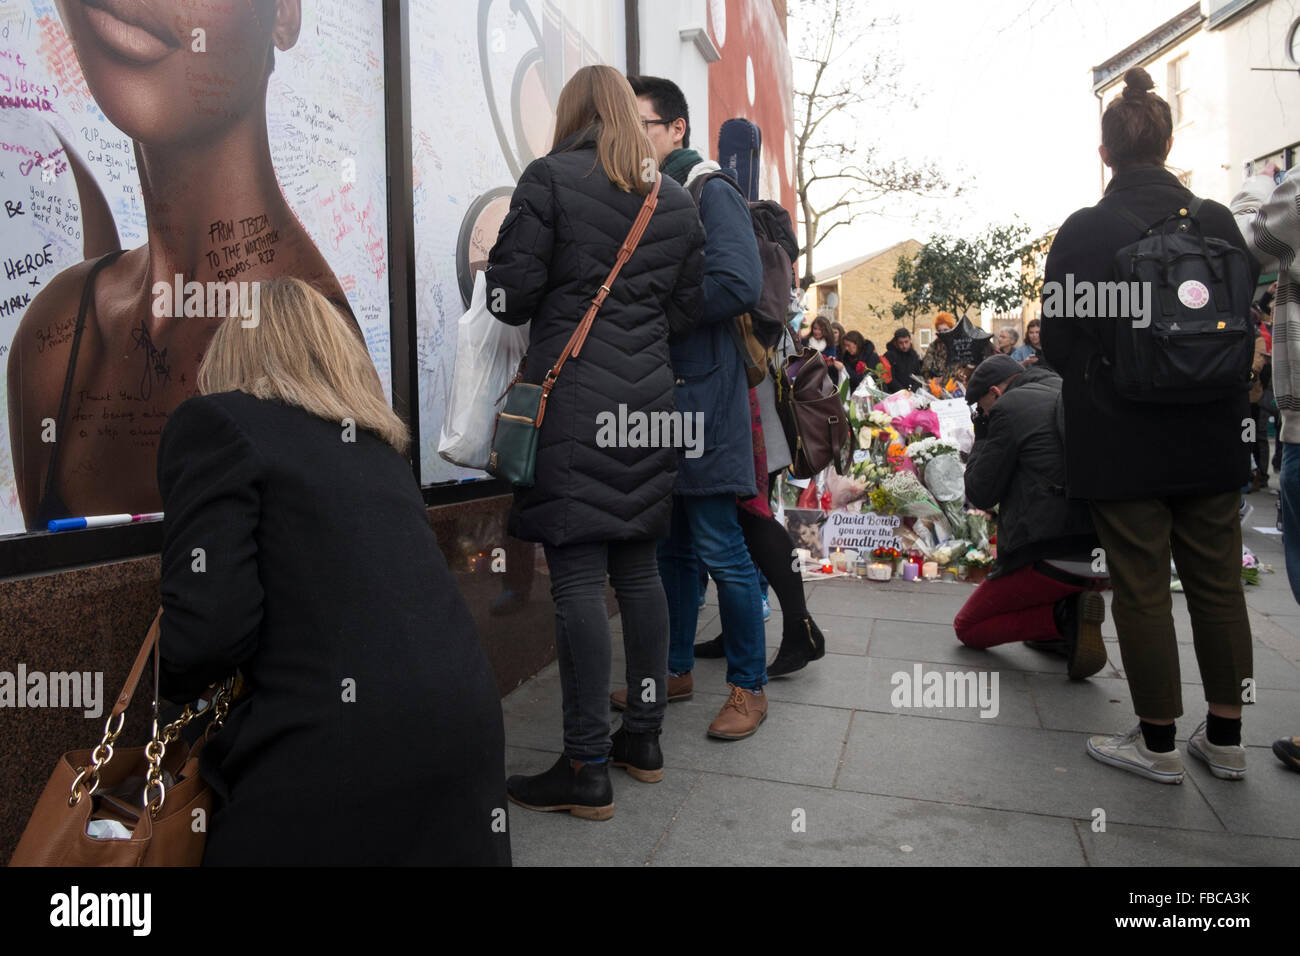 London, UK. 13th Jan, 2016.Fans pay tribute to David Bowie at a mural in Brixton where he was born. Stock Photo